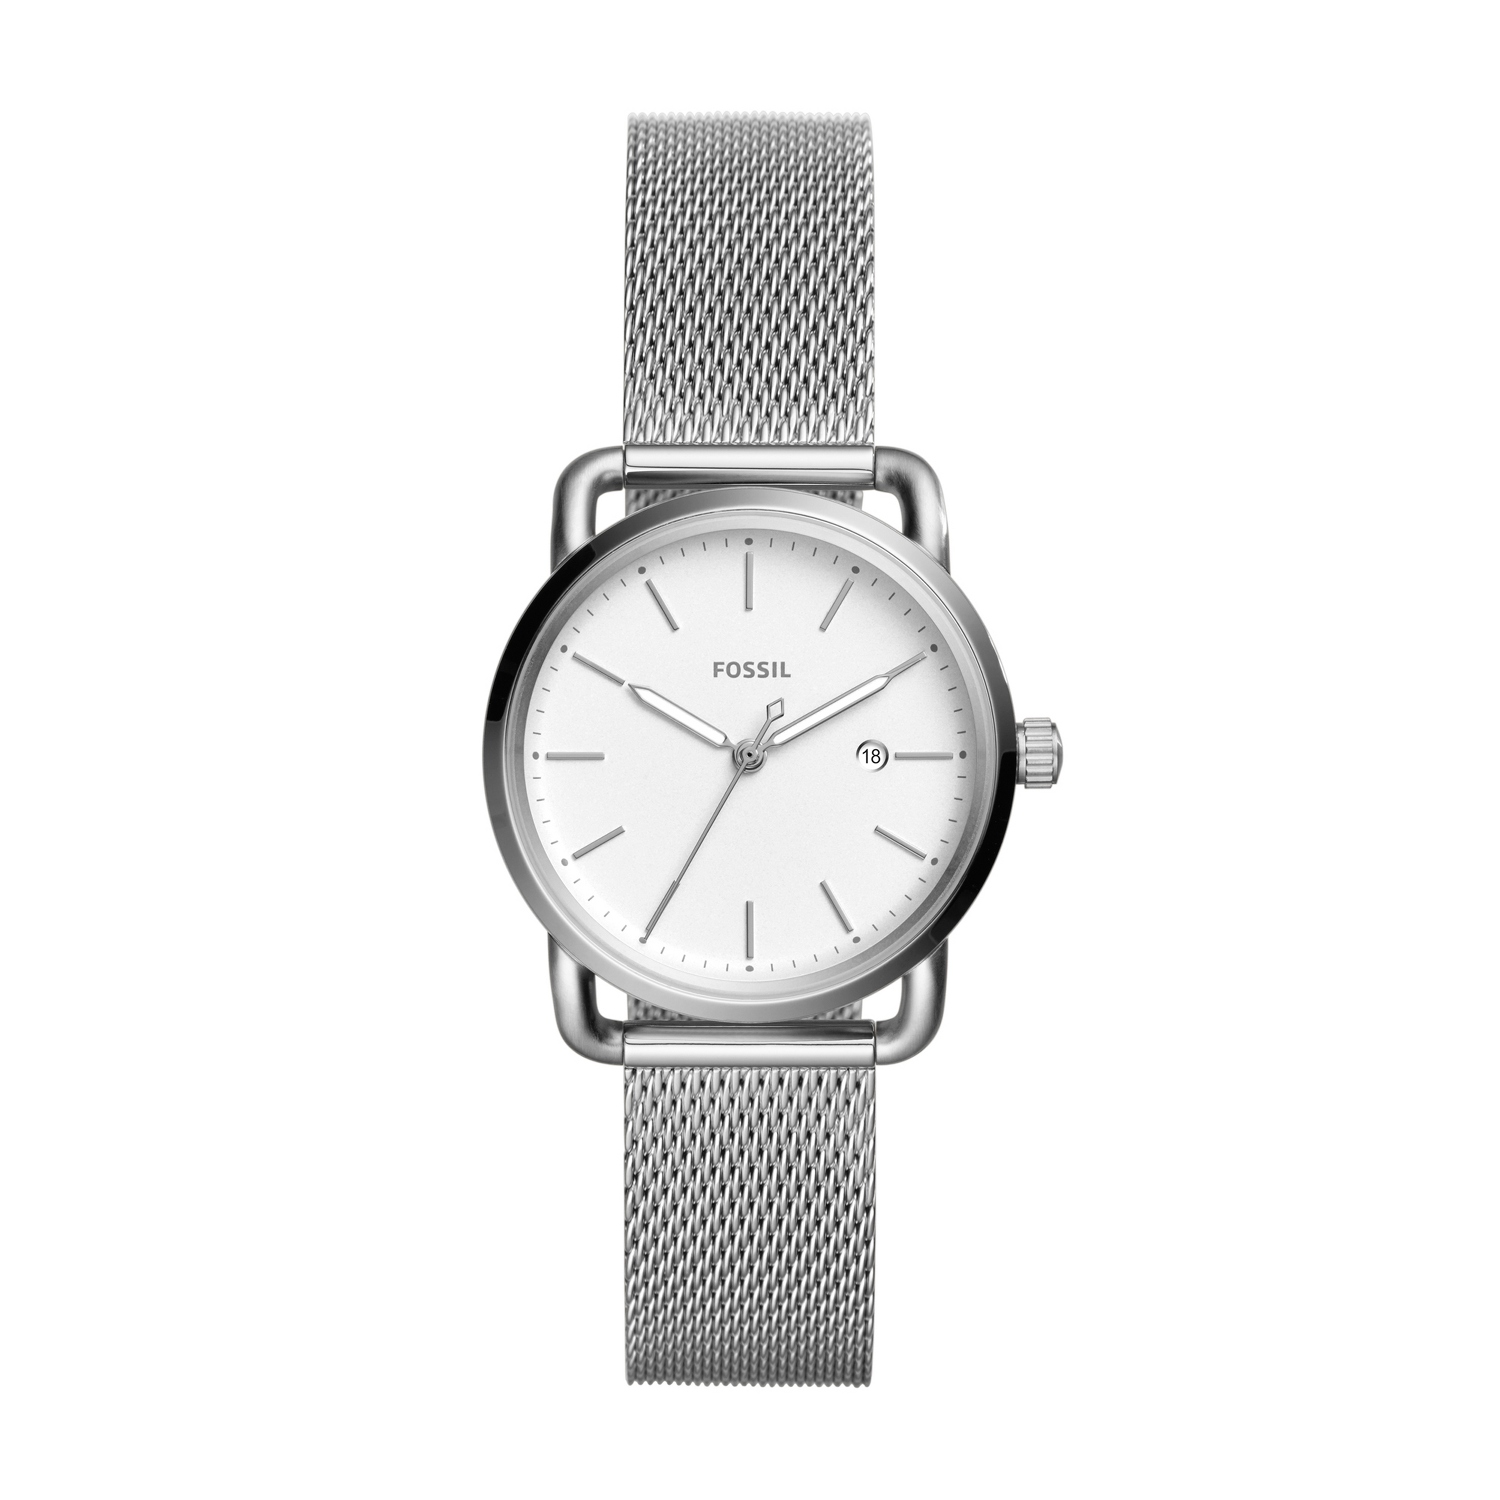 Fossil Commuter Stainless Steel Watch